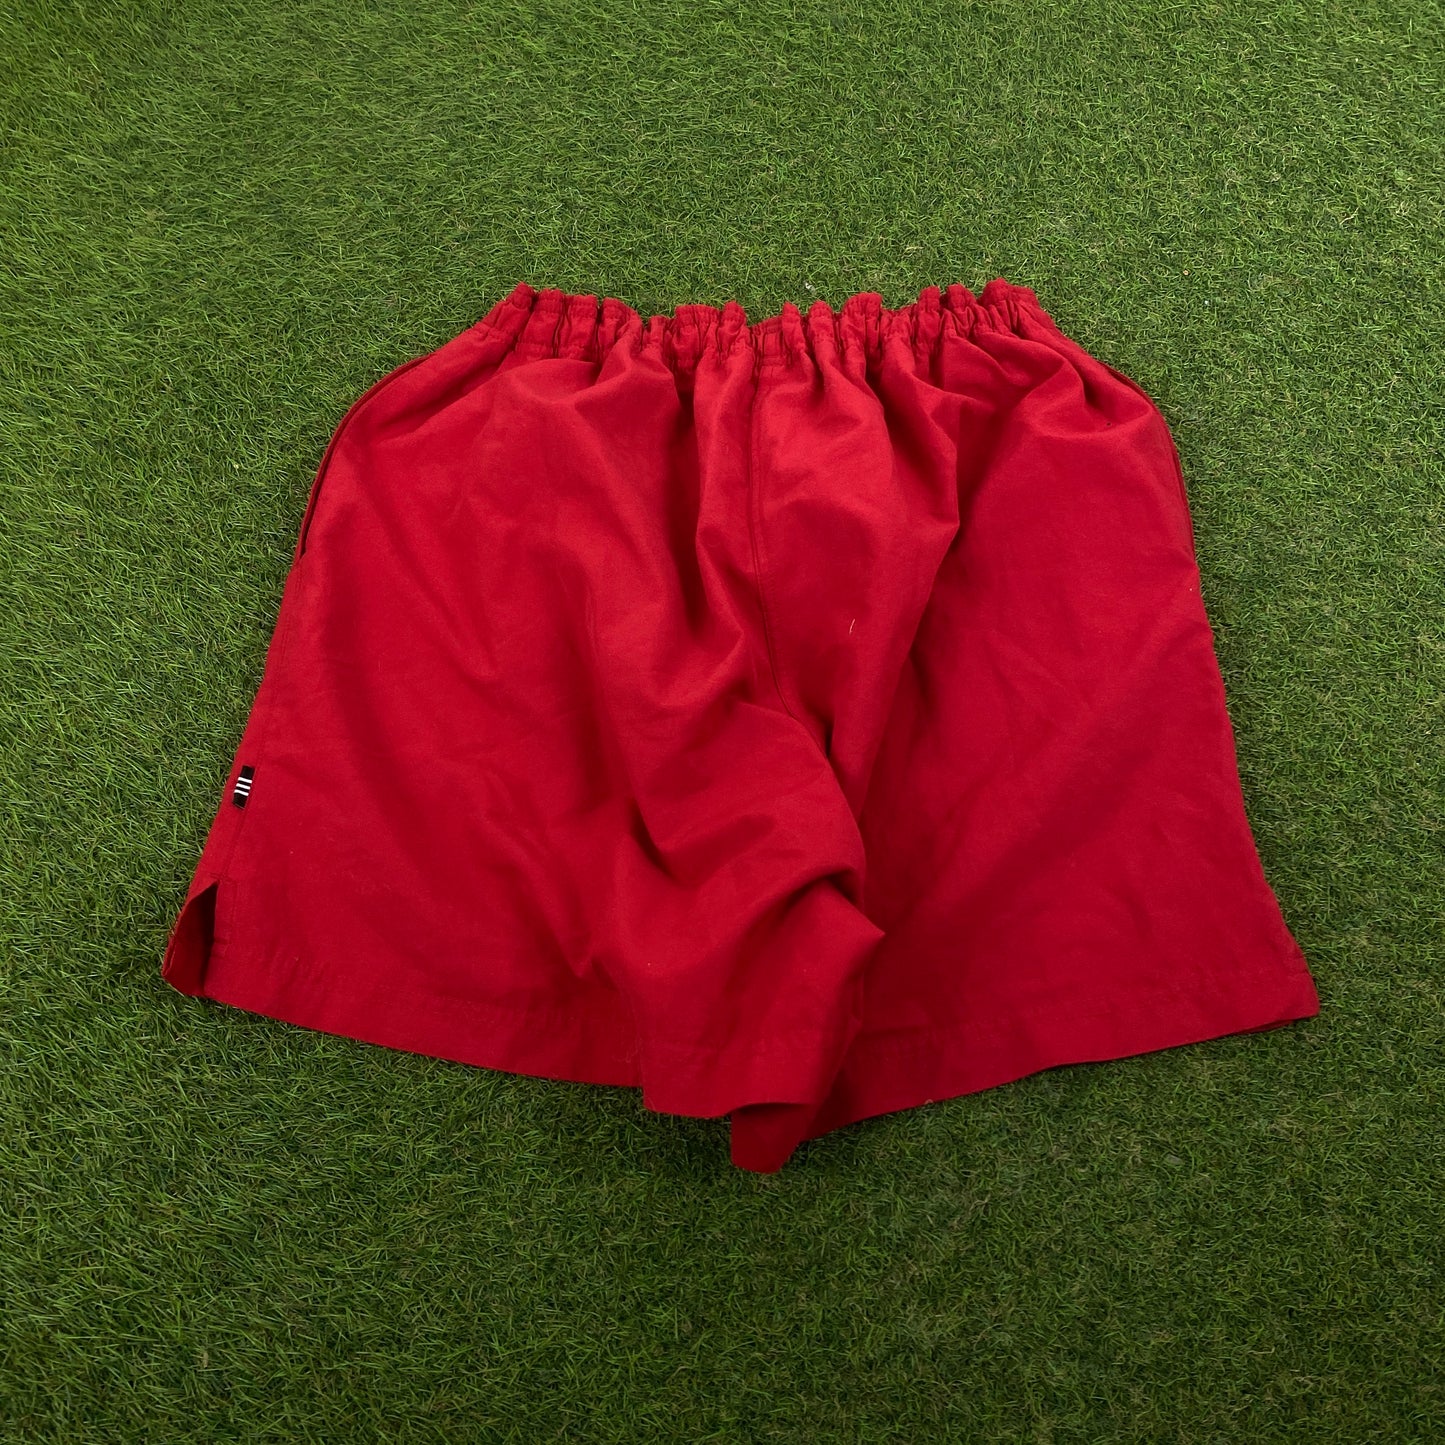 90s Adidas Trefoil Shorts Red Large